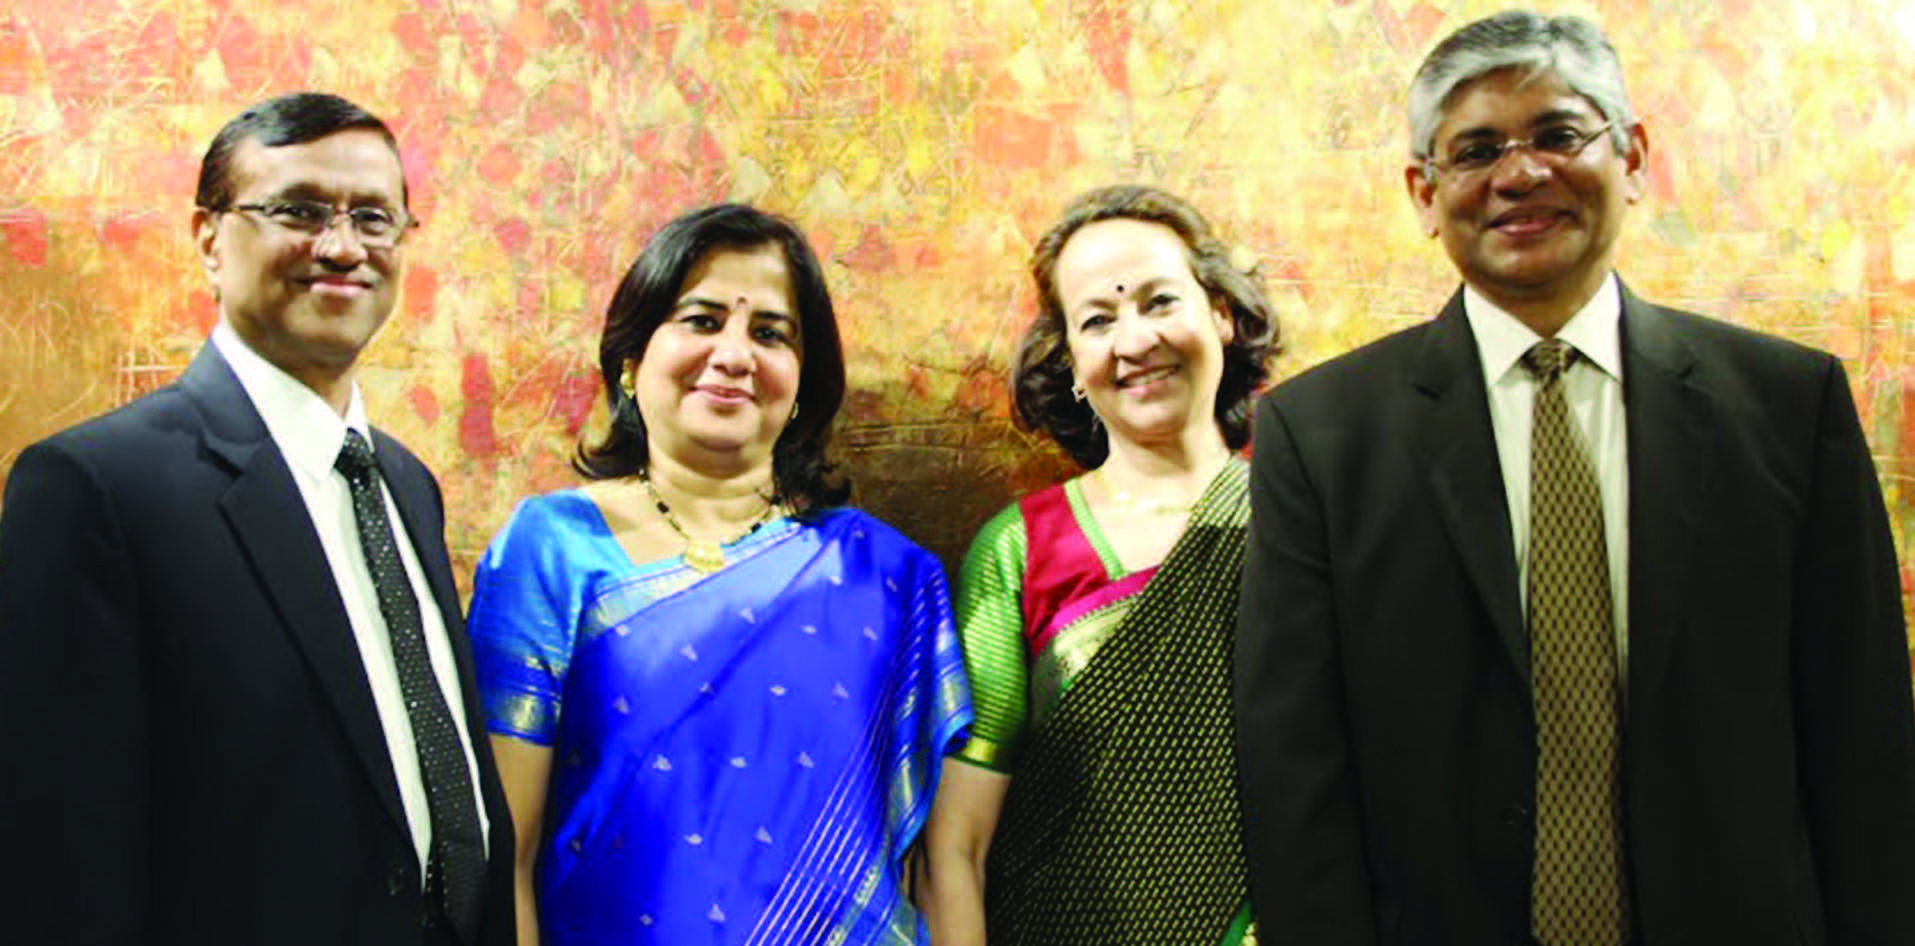 At the Community reception to Ambassador Singh and his wife Maina Chawla Singh at Delhi Art Gallery in New York. From L to R : Consul General Dnyaneshwar M. Mulay, Dr Sadhna Shanker, Dr. Maina Chawla Singh, and Ambassador Arun Kumar Singh